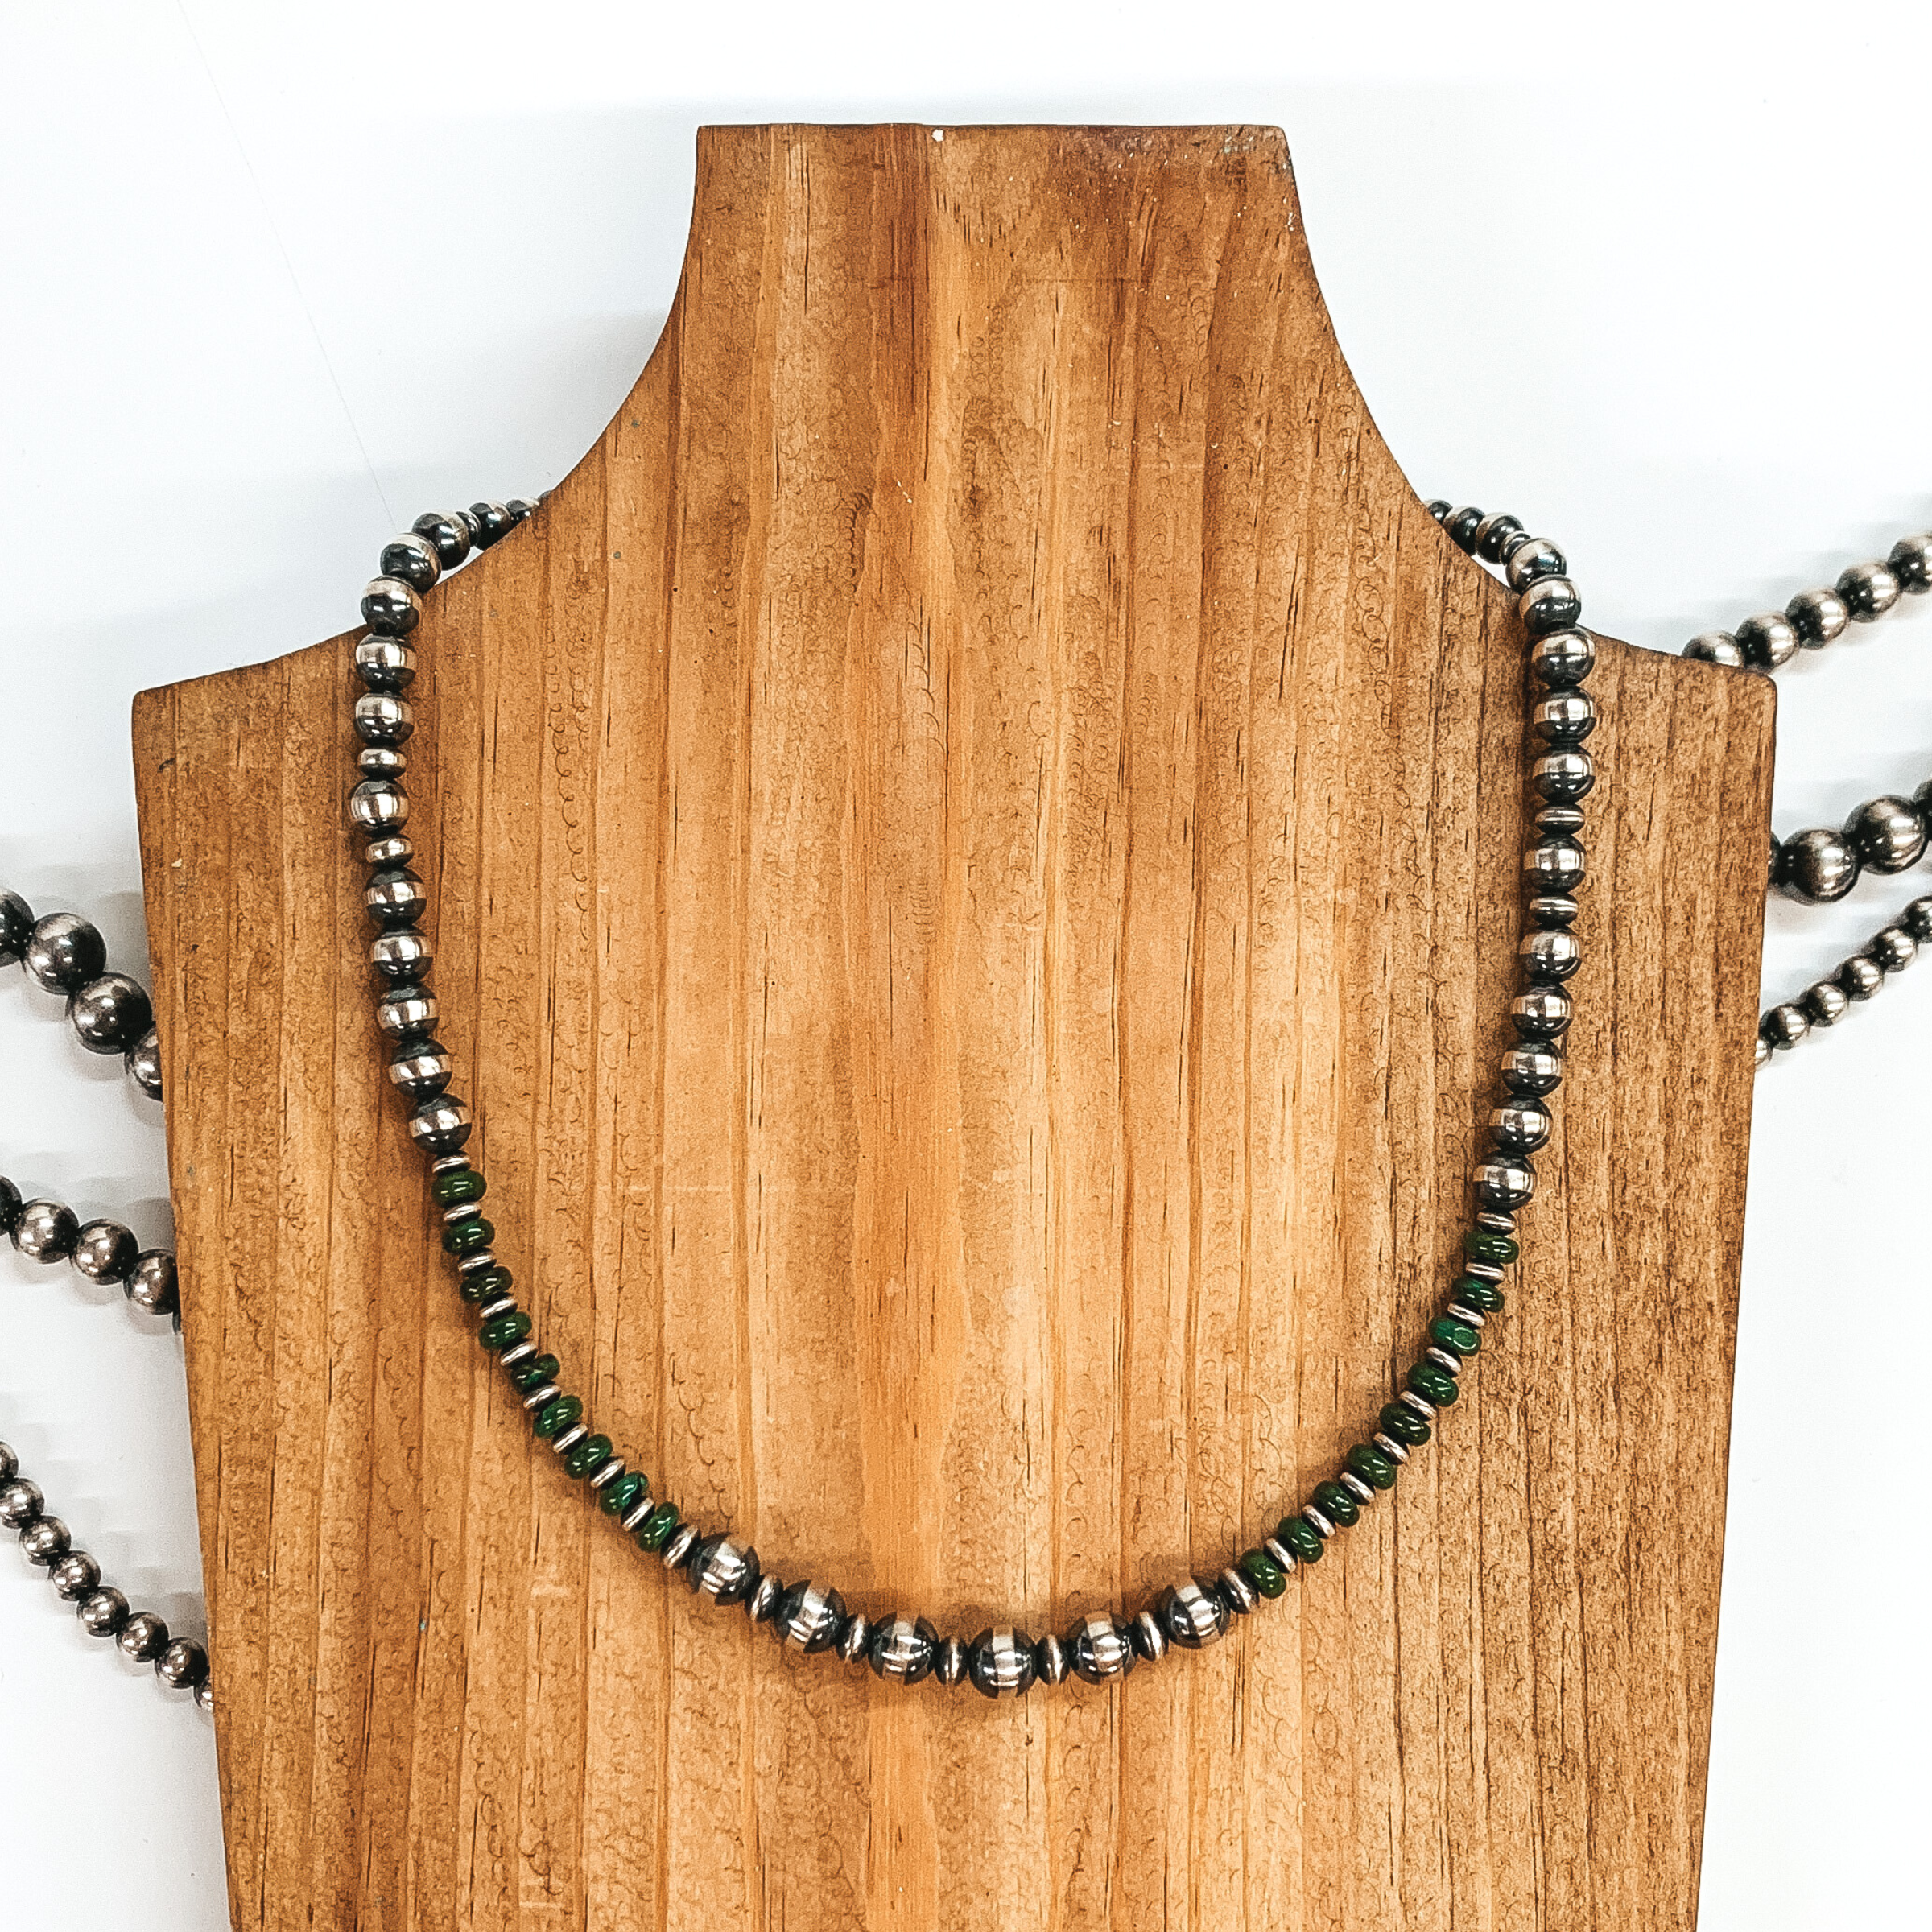 Silver beaded neckace with silver saucer spacers and turquoise bead spacers. This necklace is pictured laying on a wood necklace holder on a white background.